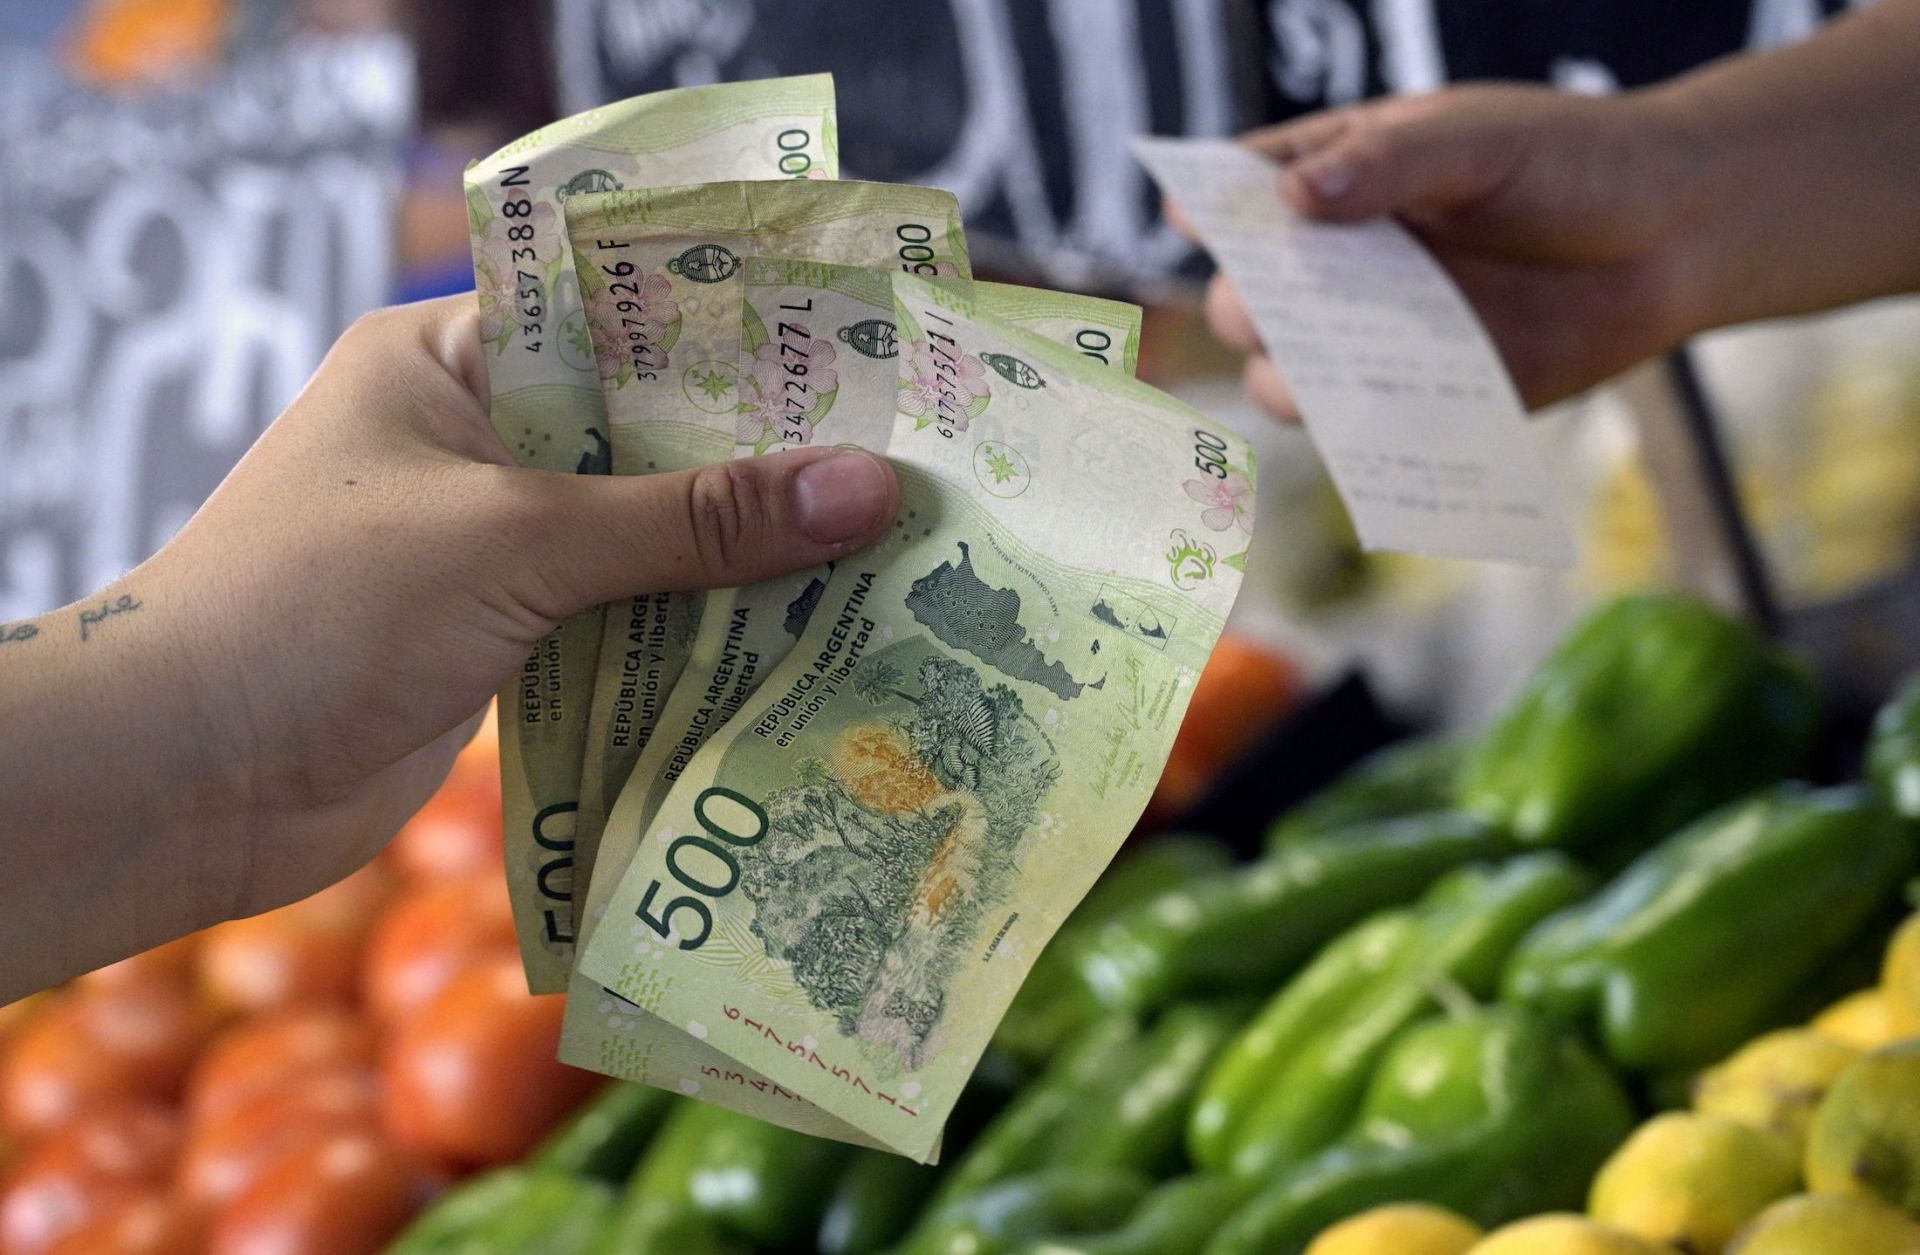 A woman pays for fruits and vegetables in Argentine pesos at a market in Buenos Aires on Feb. 10, 2023.